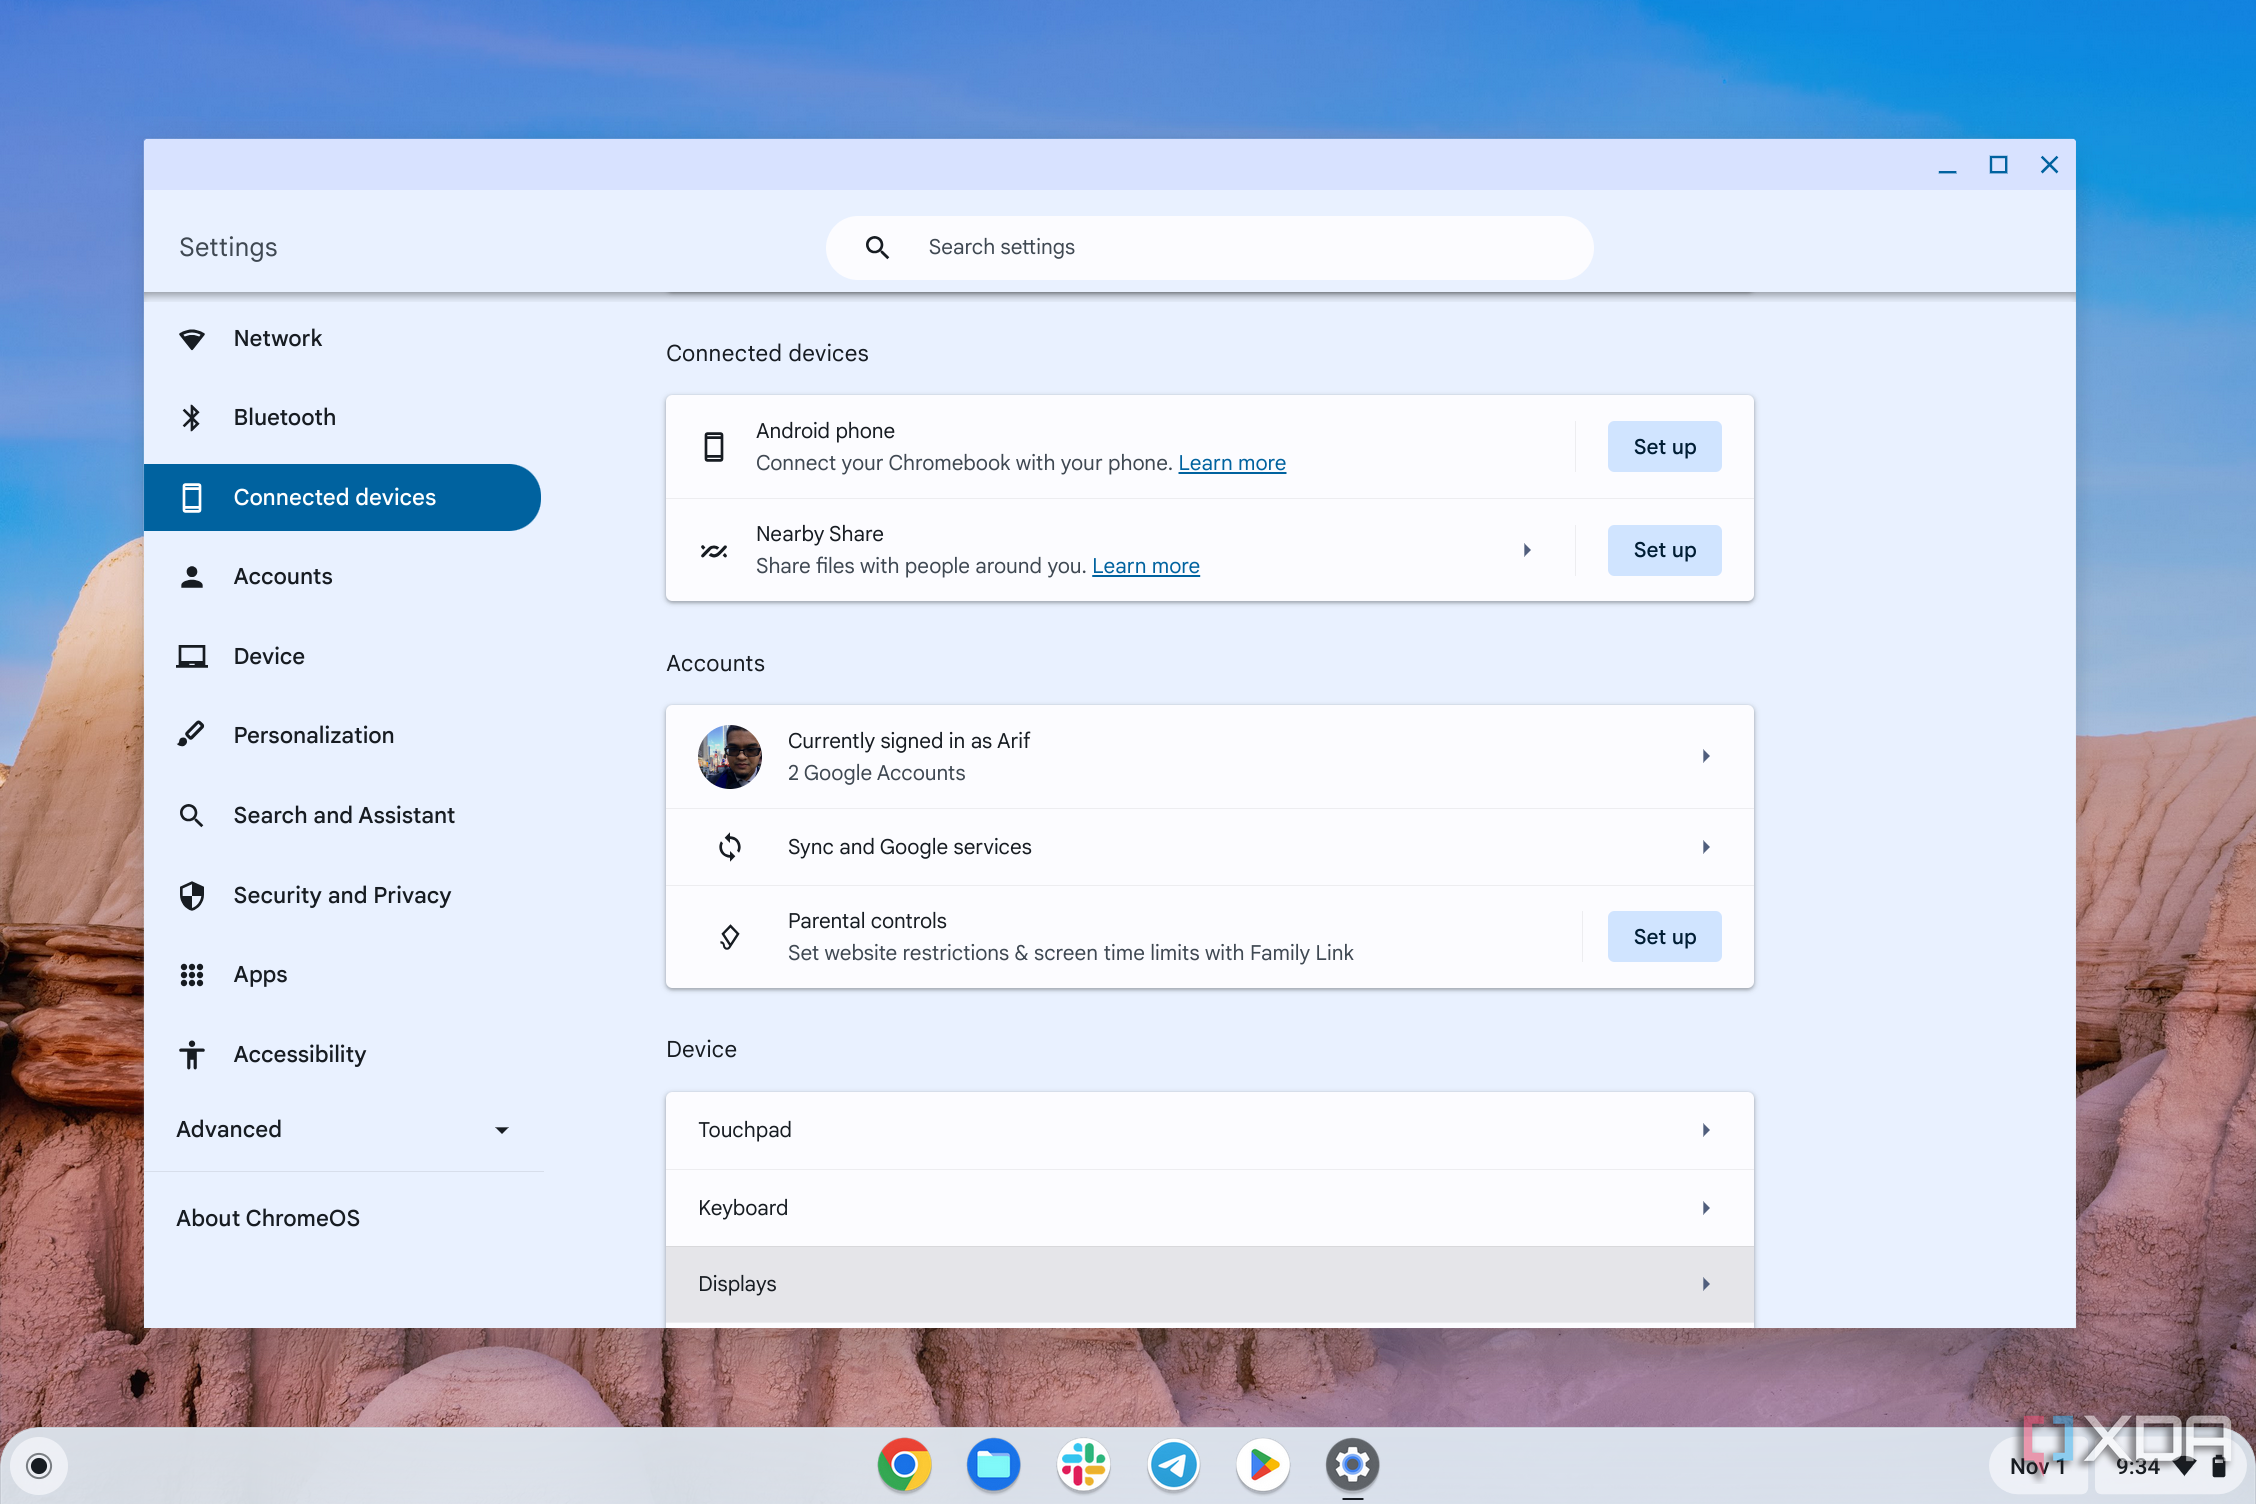 Connecting an Android phone to a Chromebook on ChromeOS